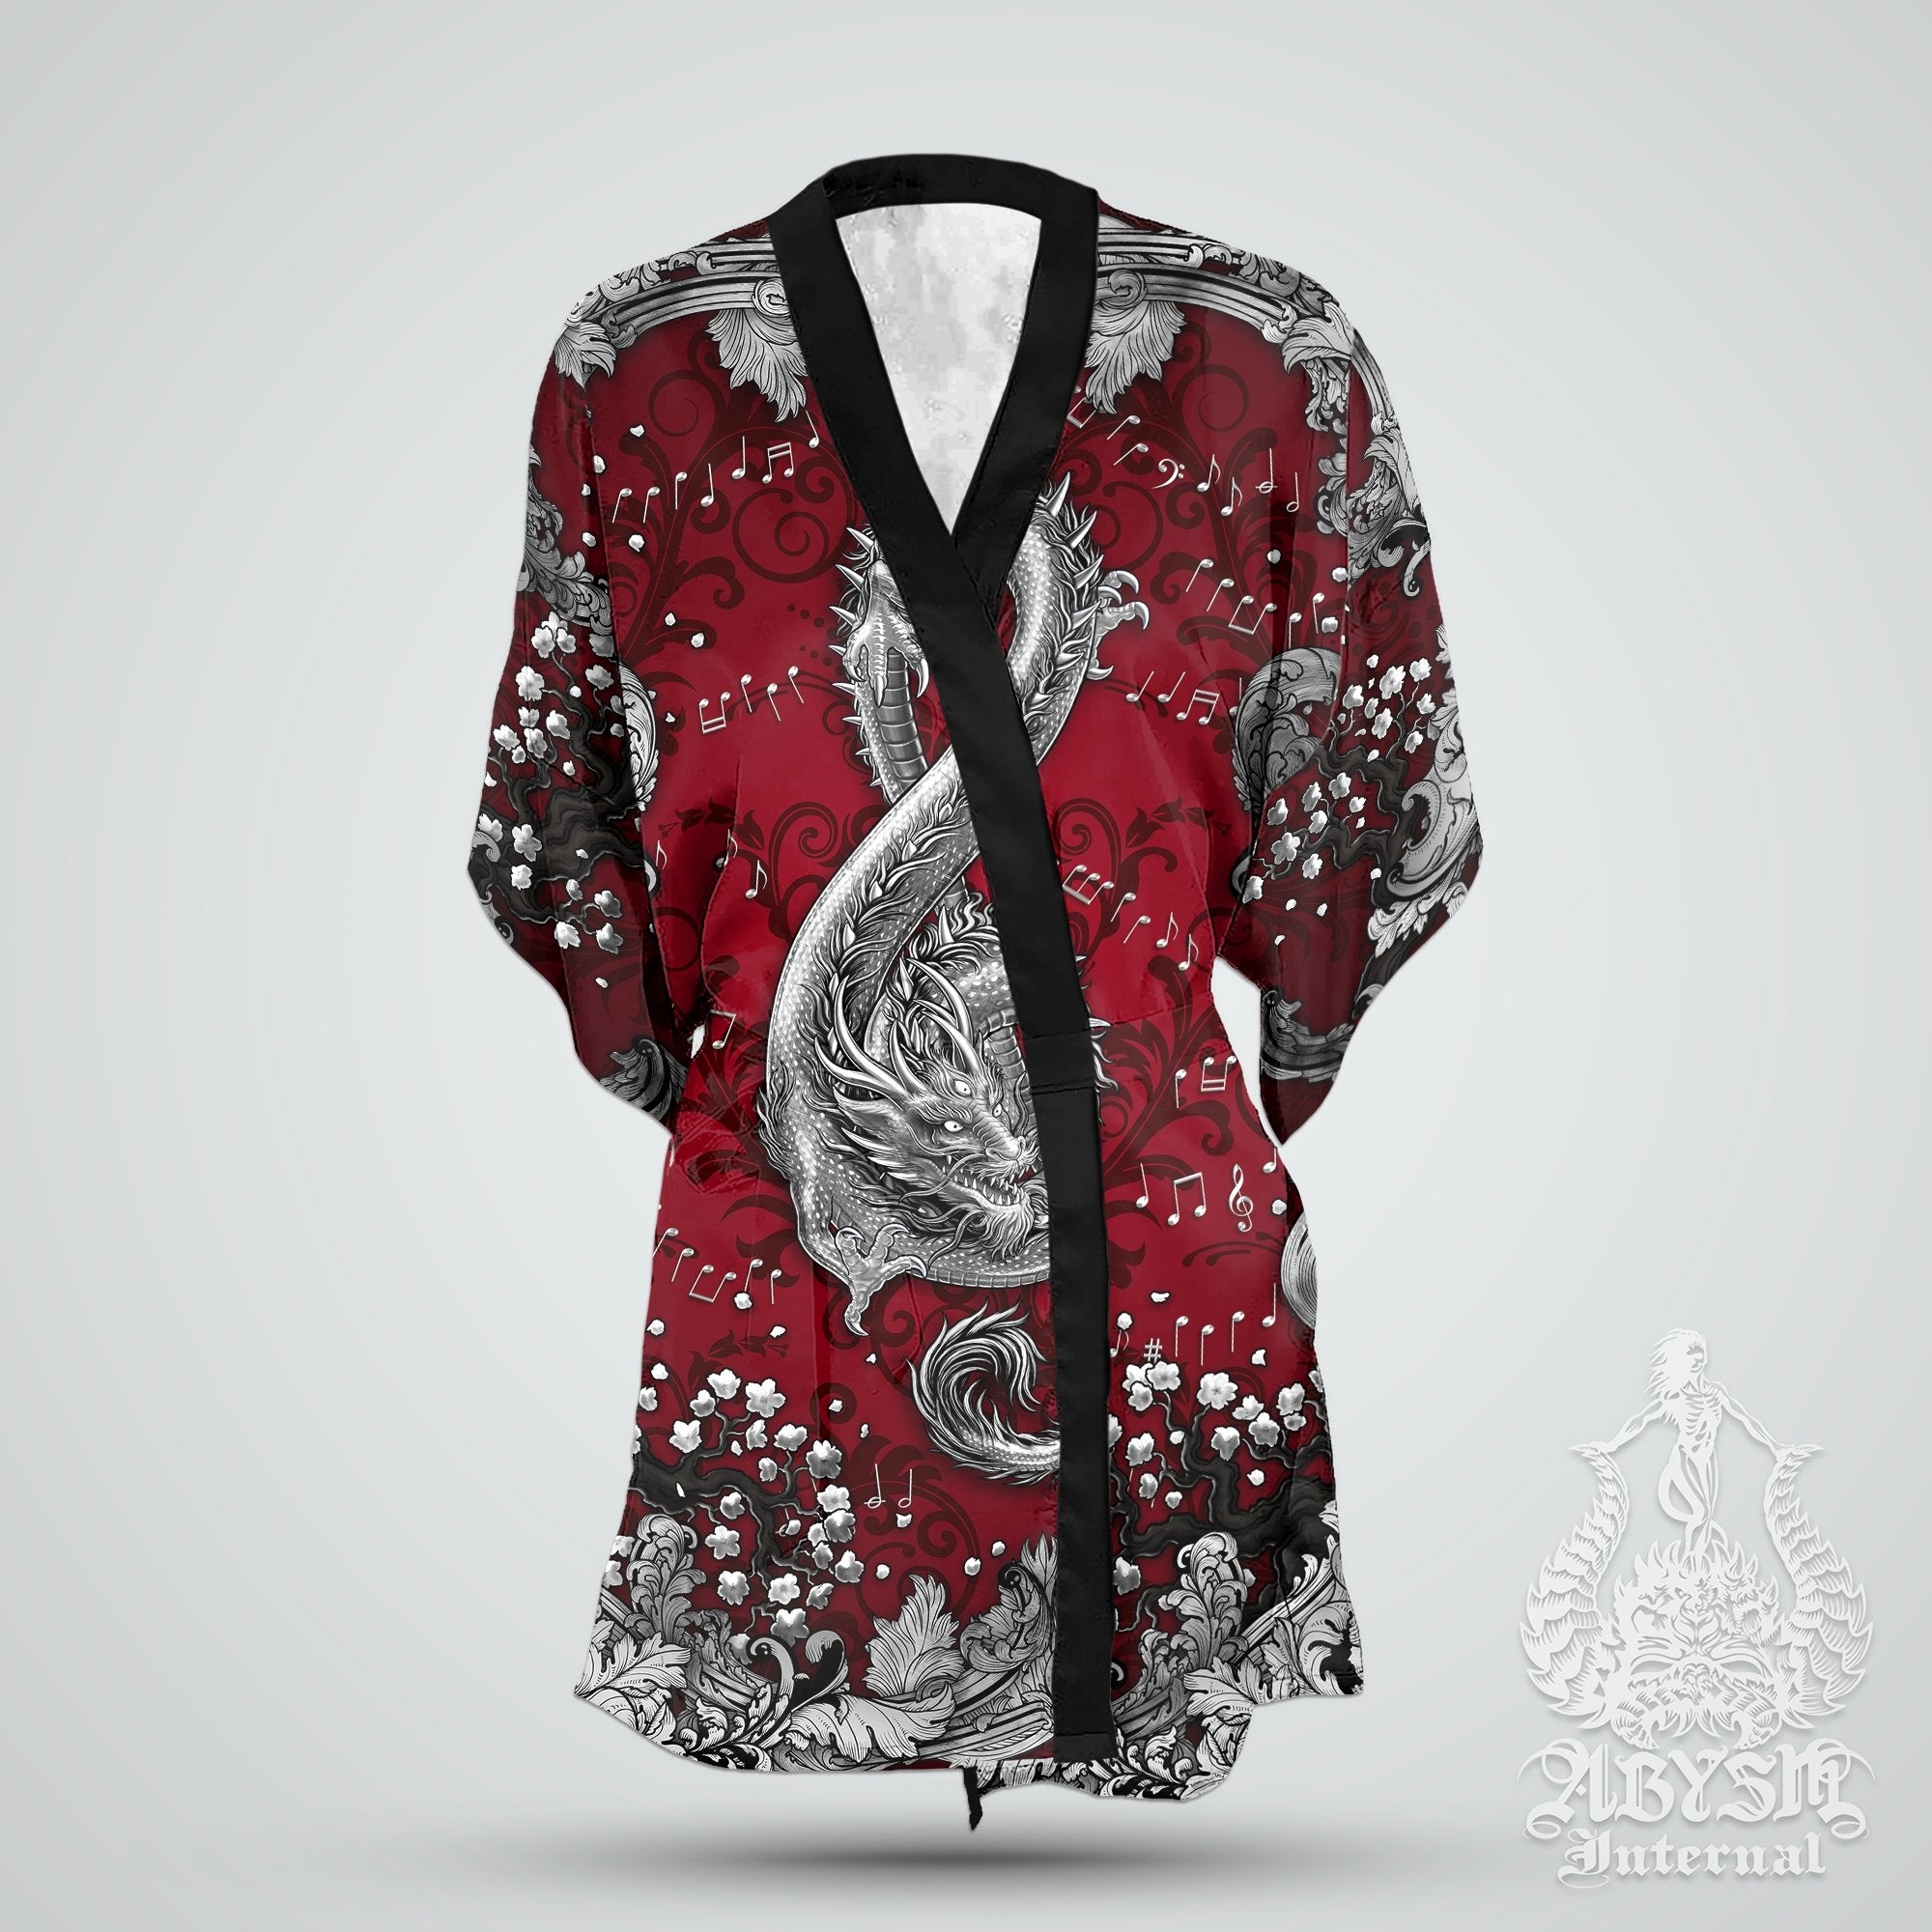 Music Cover Up, Beach Outfit, Party Kimono, Summer Festival Robe, Indie and Alternative Clothing, Unisex - Dragon, Silver Red - Abysm Internal